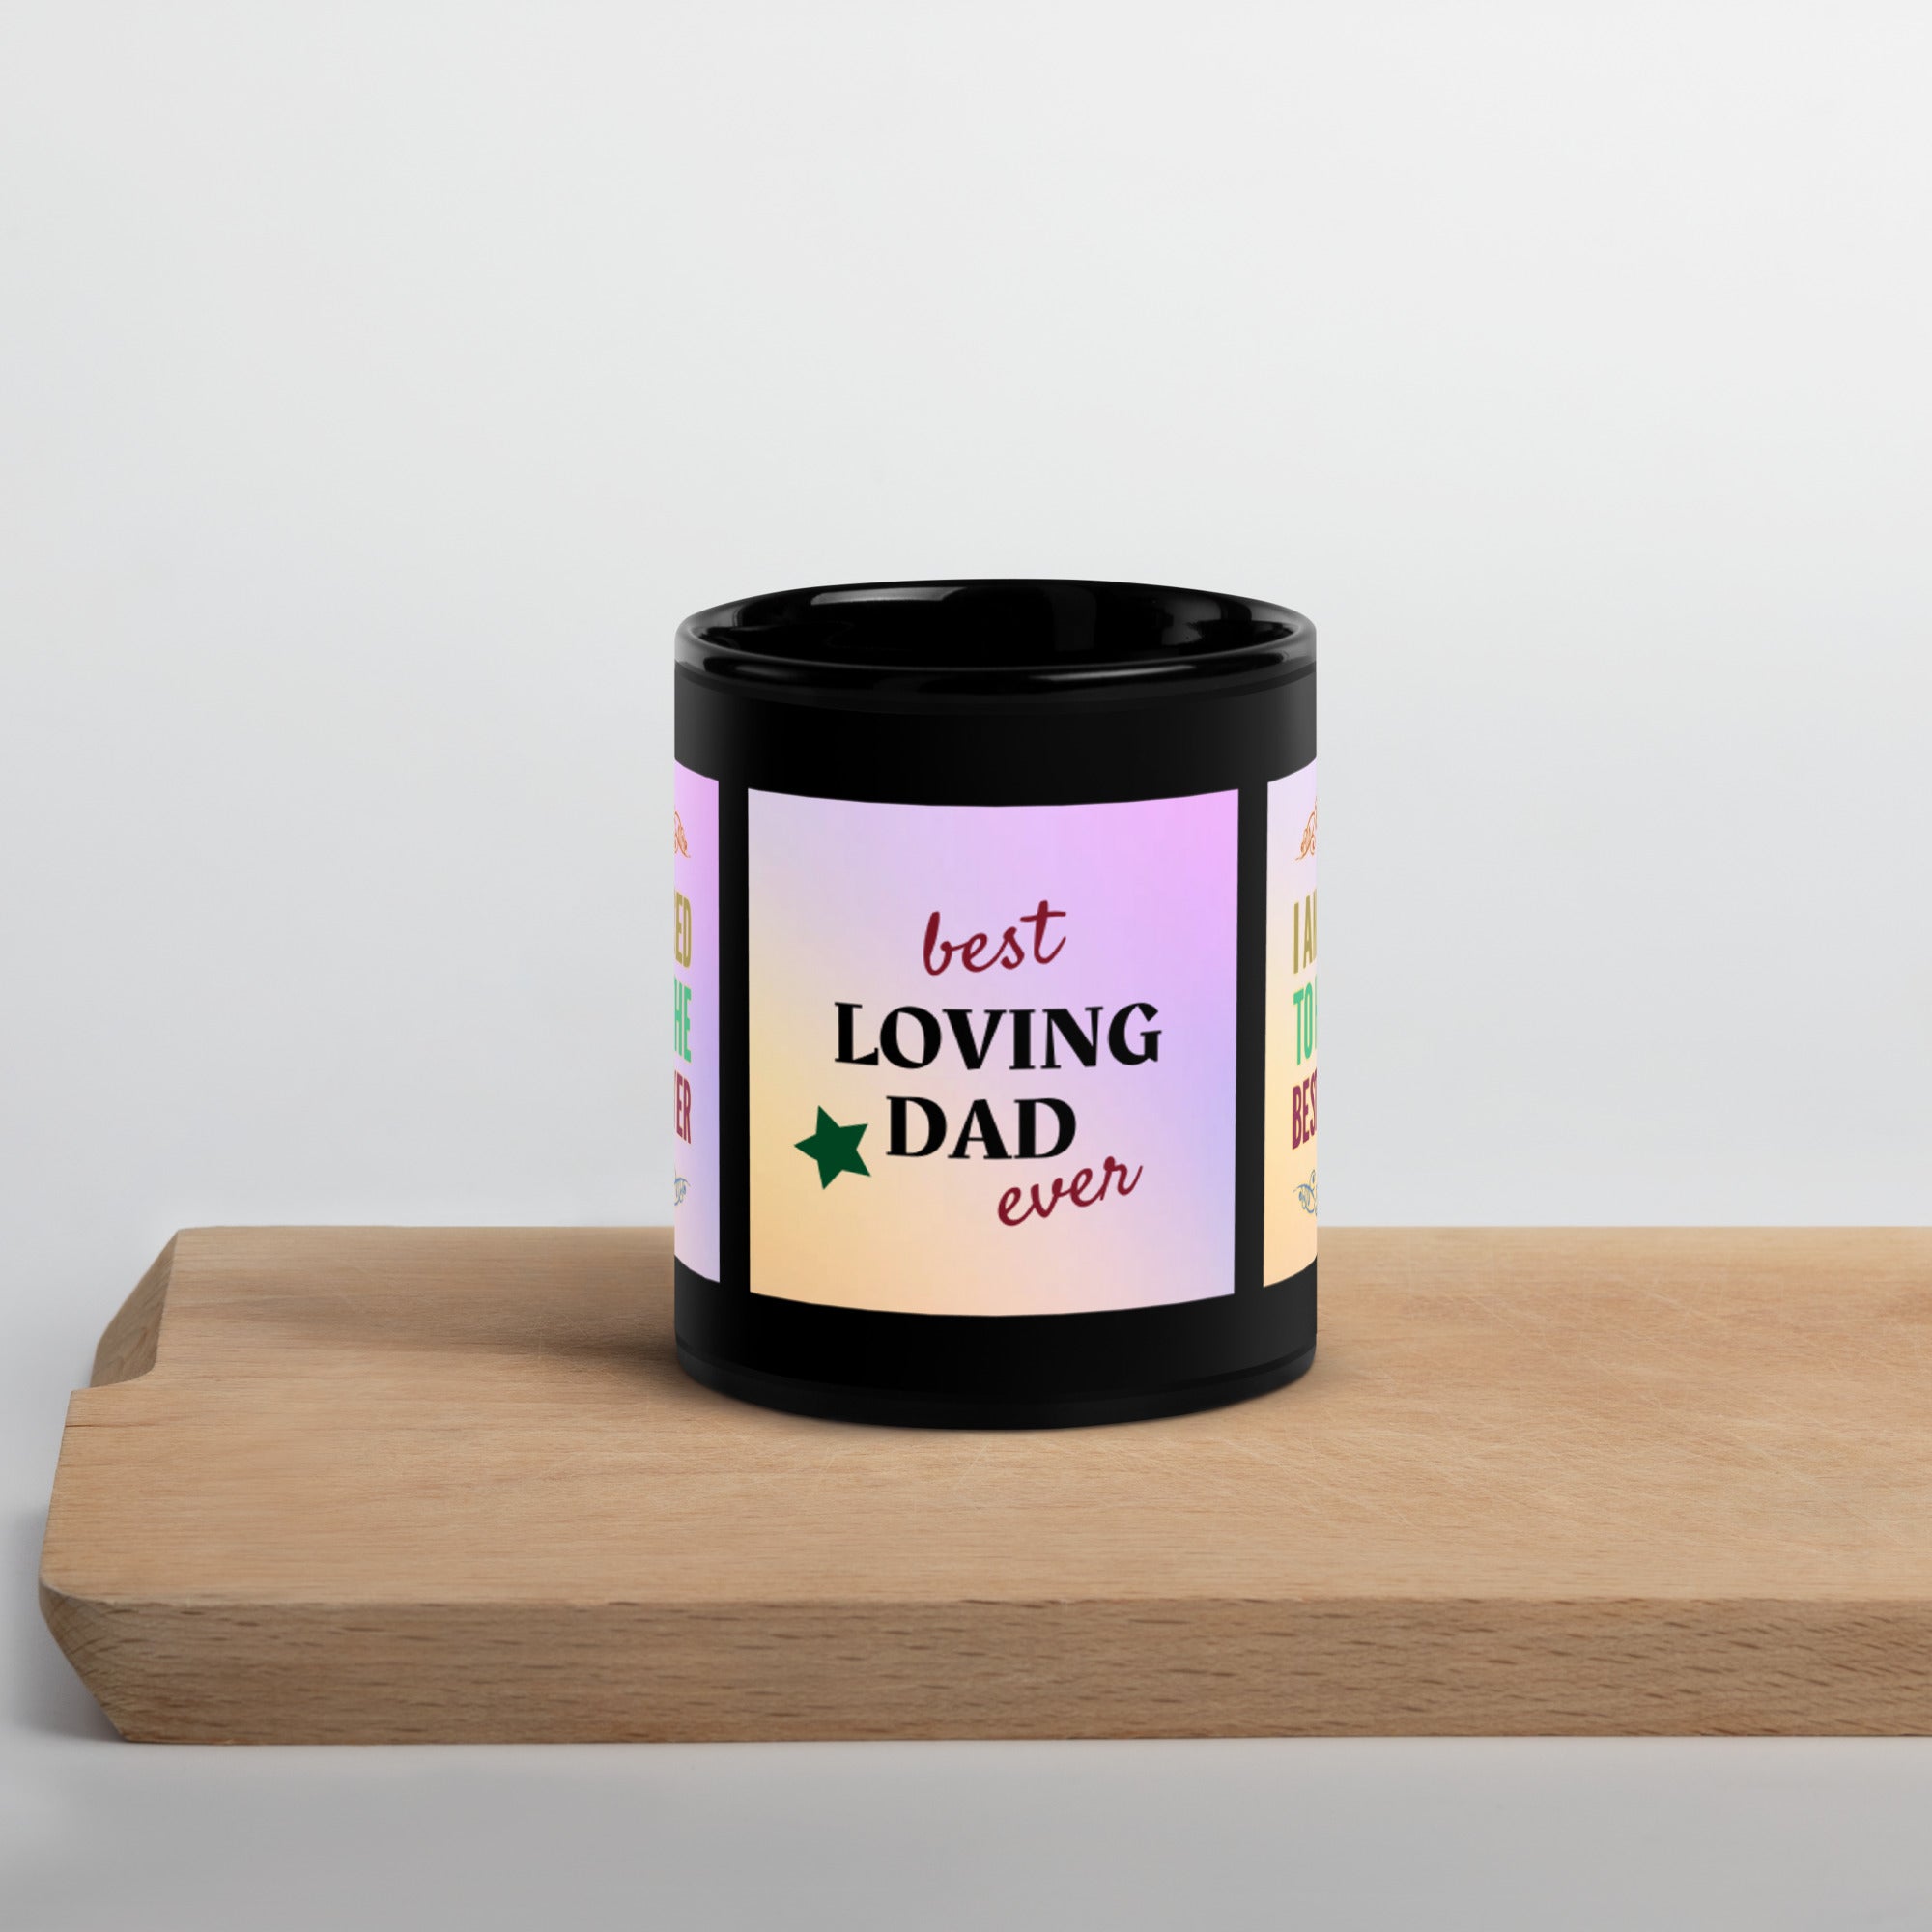 GloWell Designs - Black Glossy Mug - Affirmation Quote - Gift - Best Dad Ever - GloWell Designs